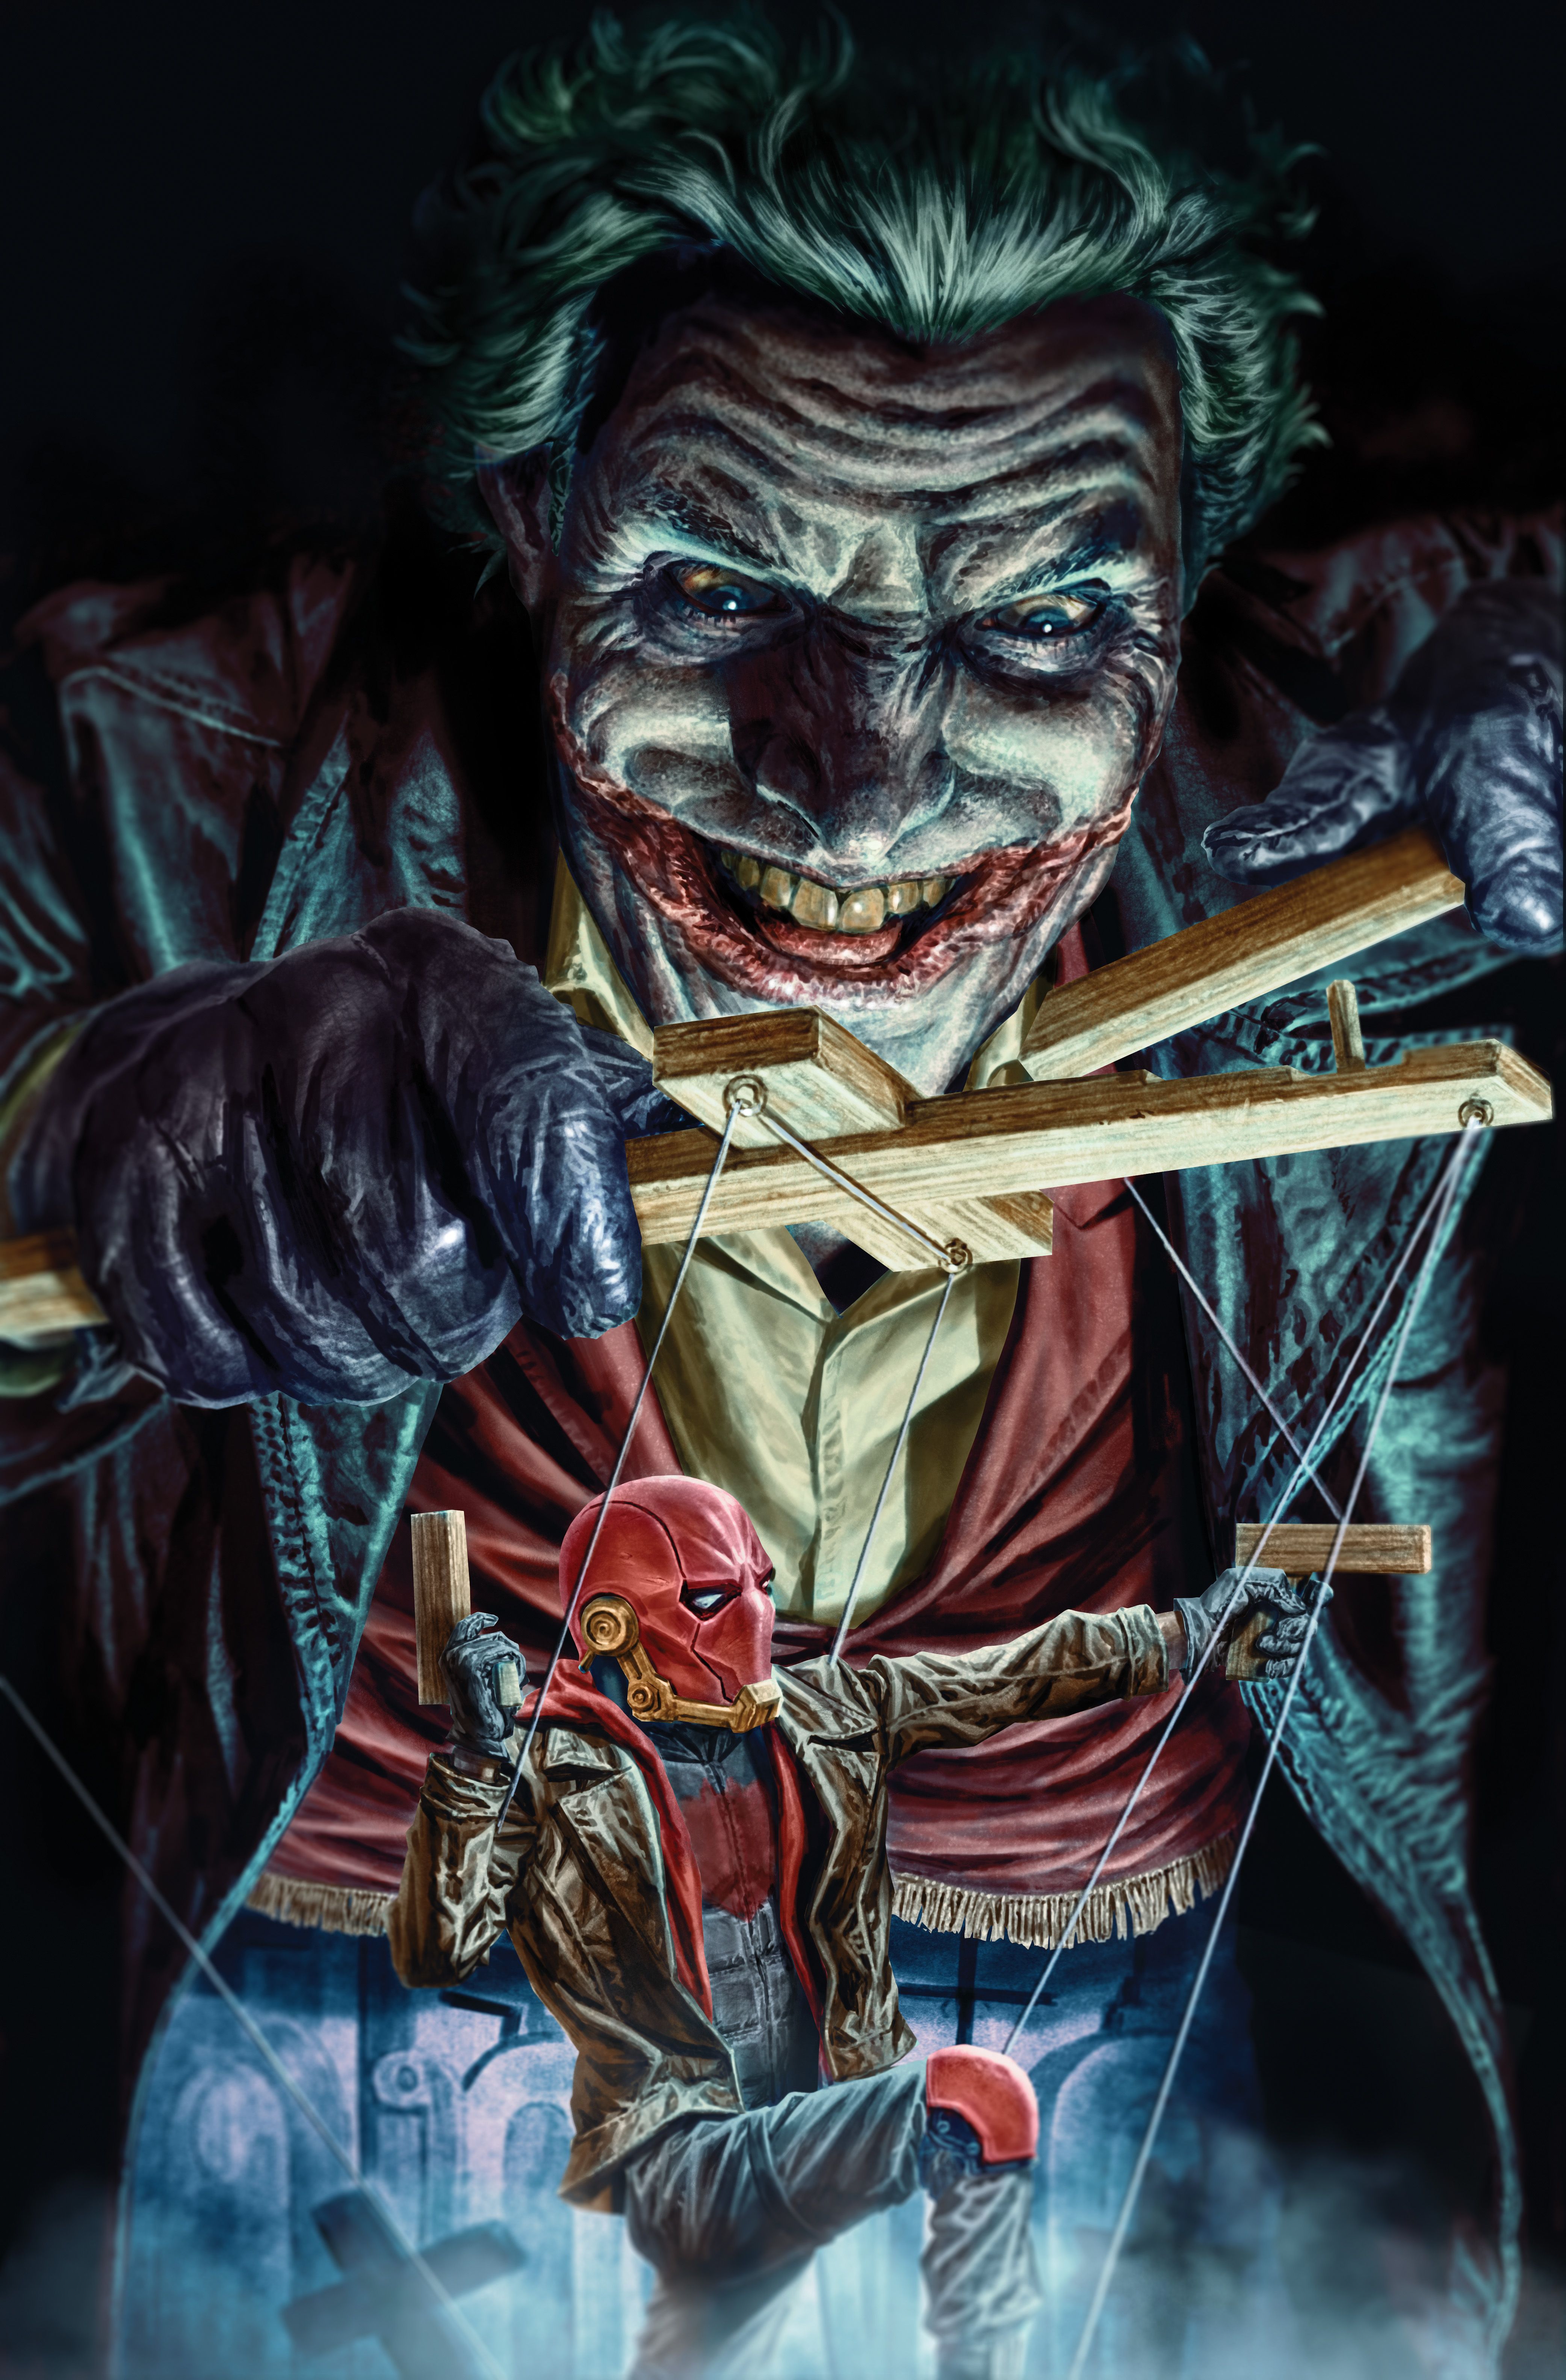 The Joker The Man Who Stopped Laughing 4 Open to Order Variant (Bermejo)